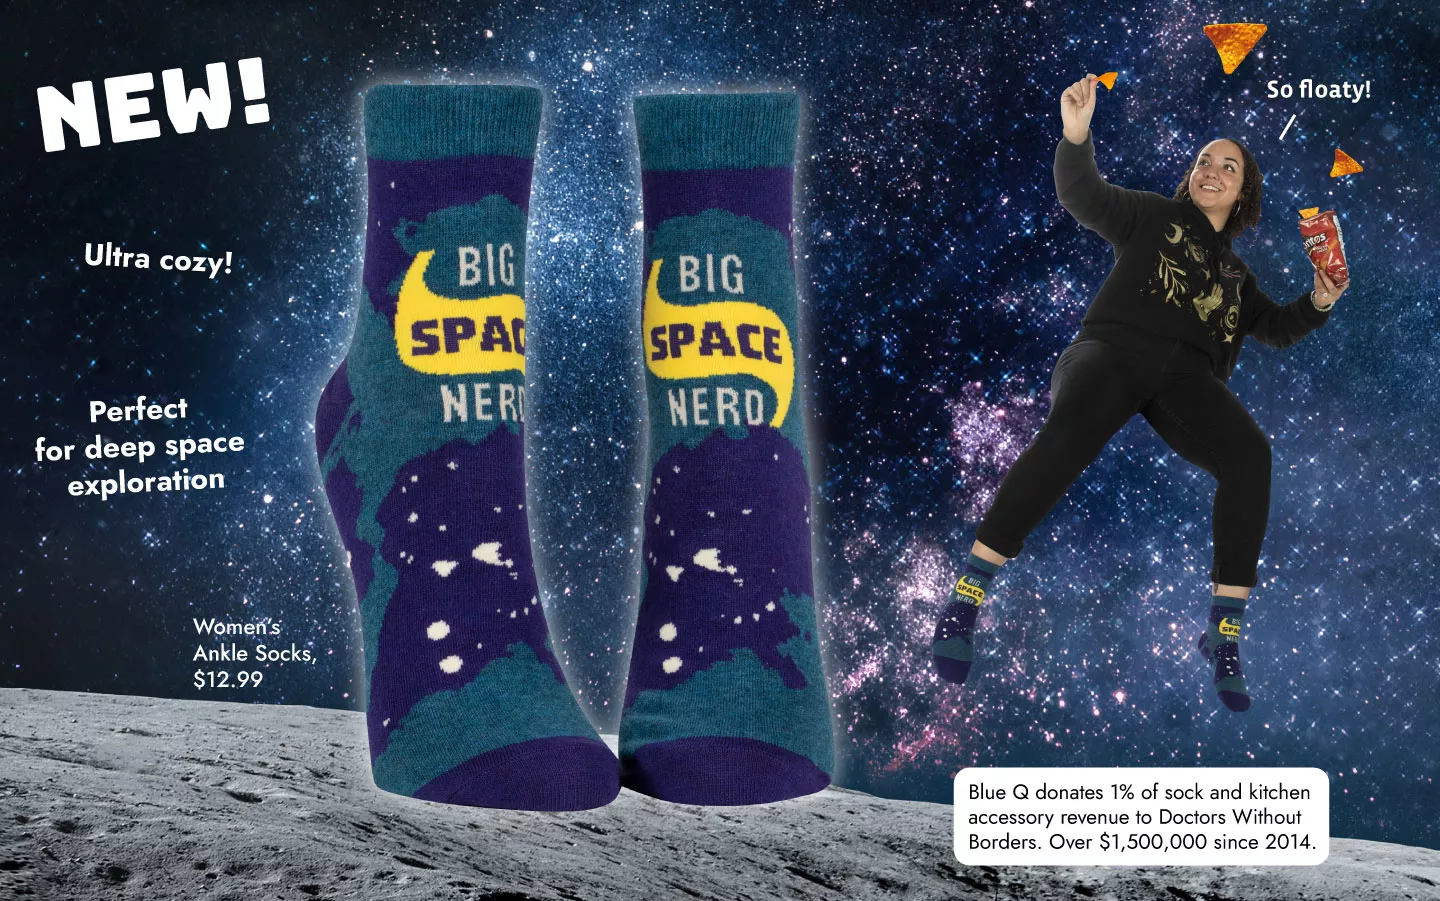 New ankle socks! Perfect for deep space exploration!